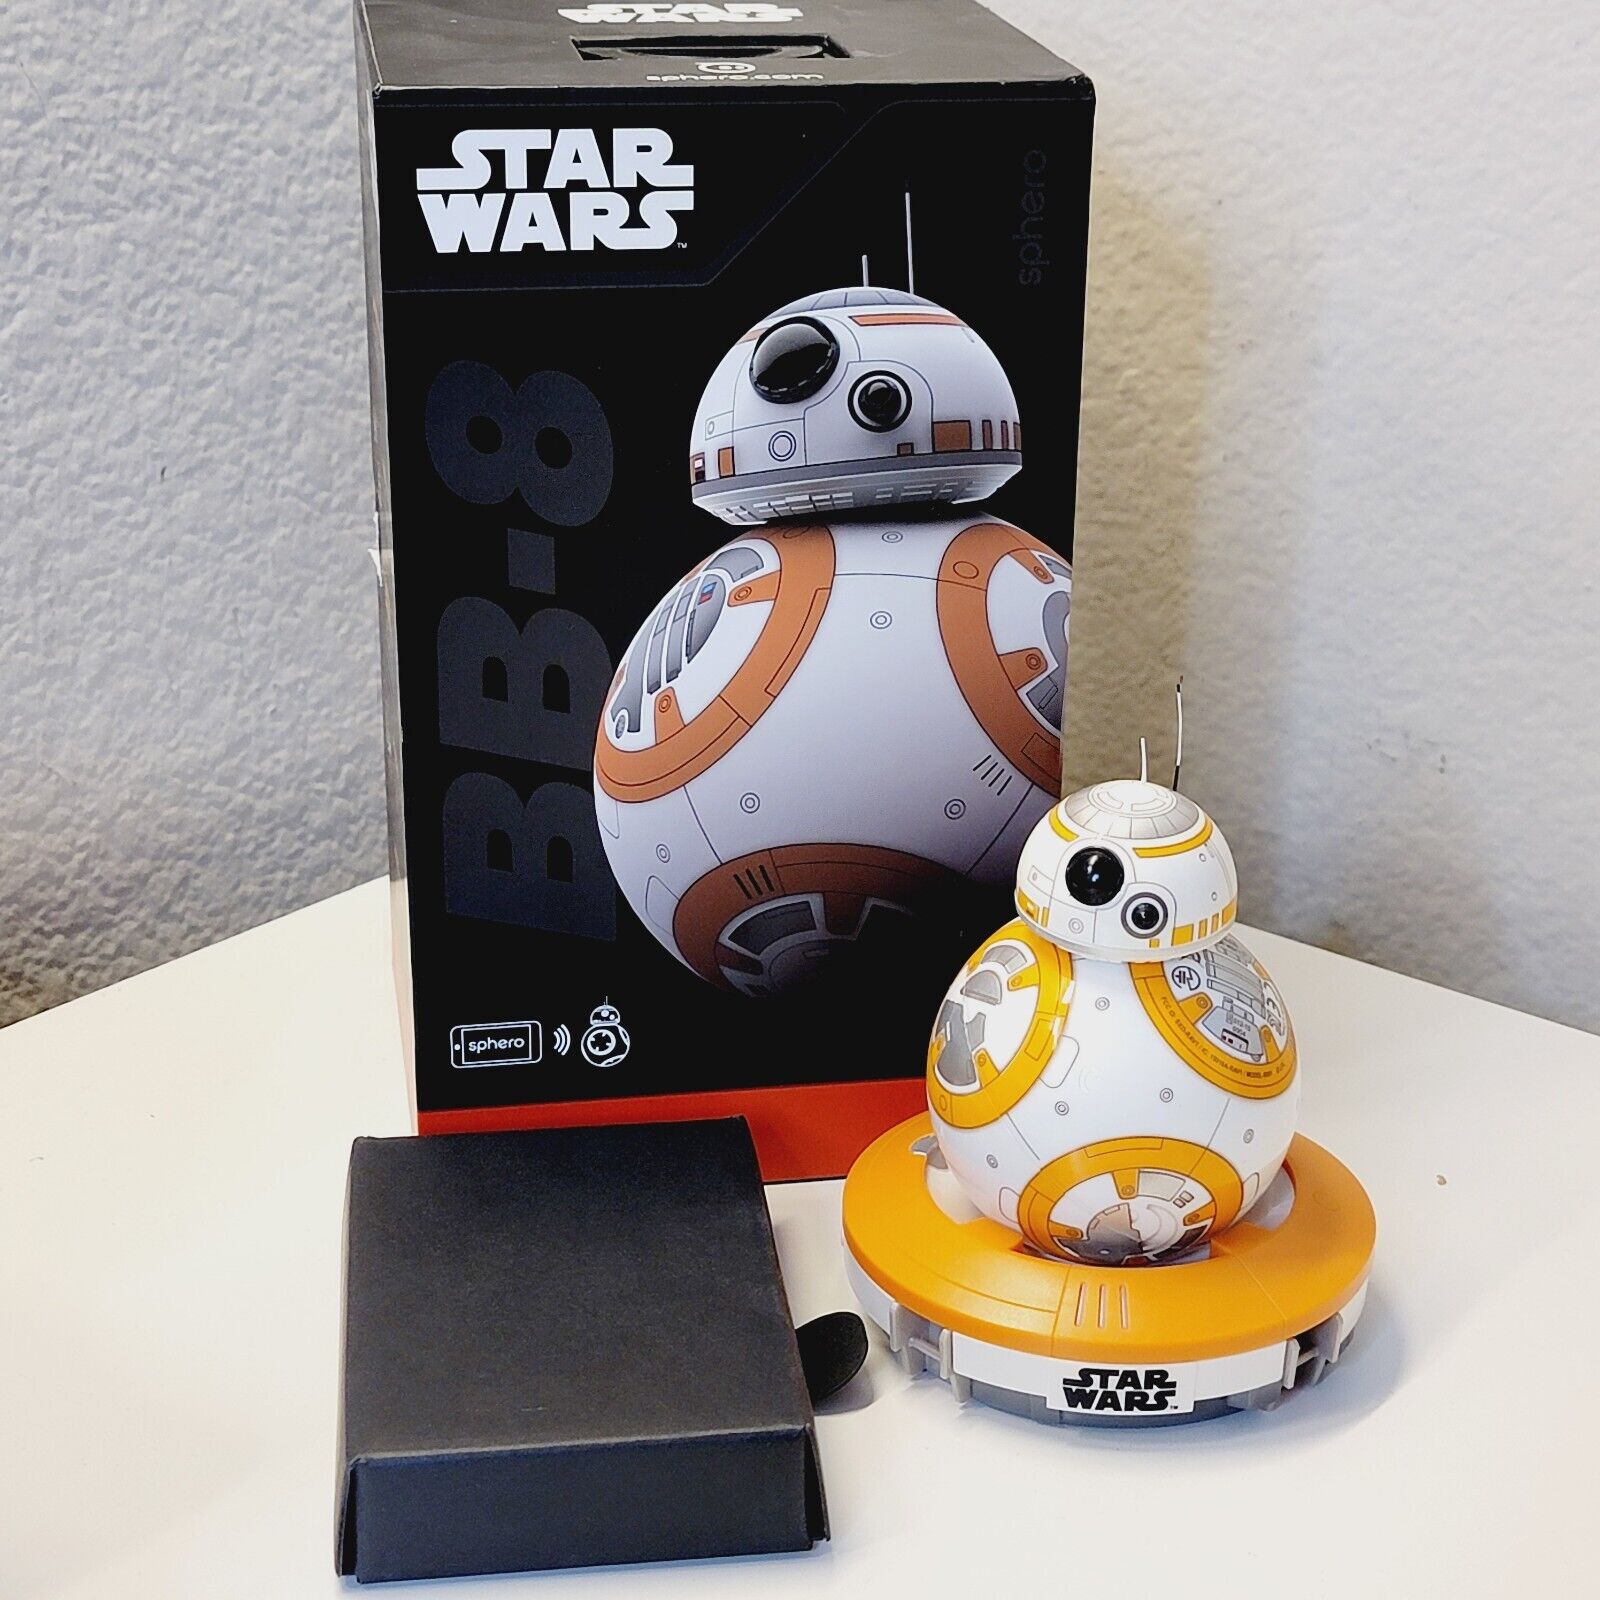 Disney Star Wars BB-8 App-Enabled Droid by Sphero Apple/Android Compatible